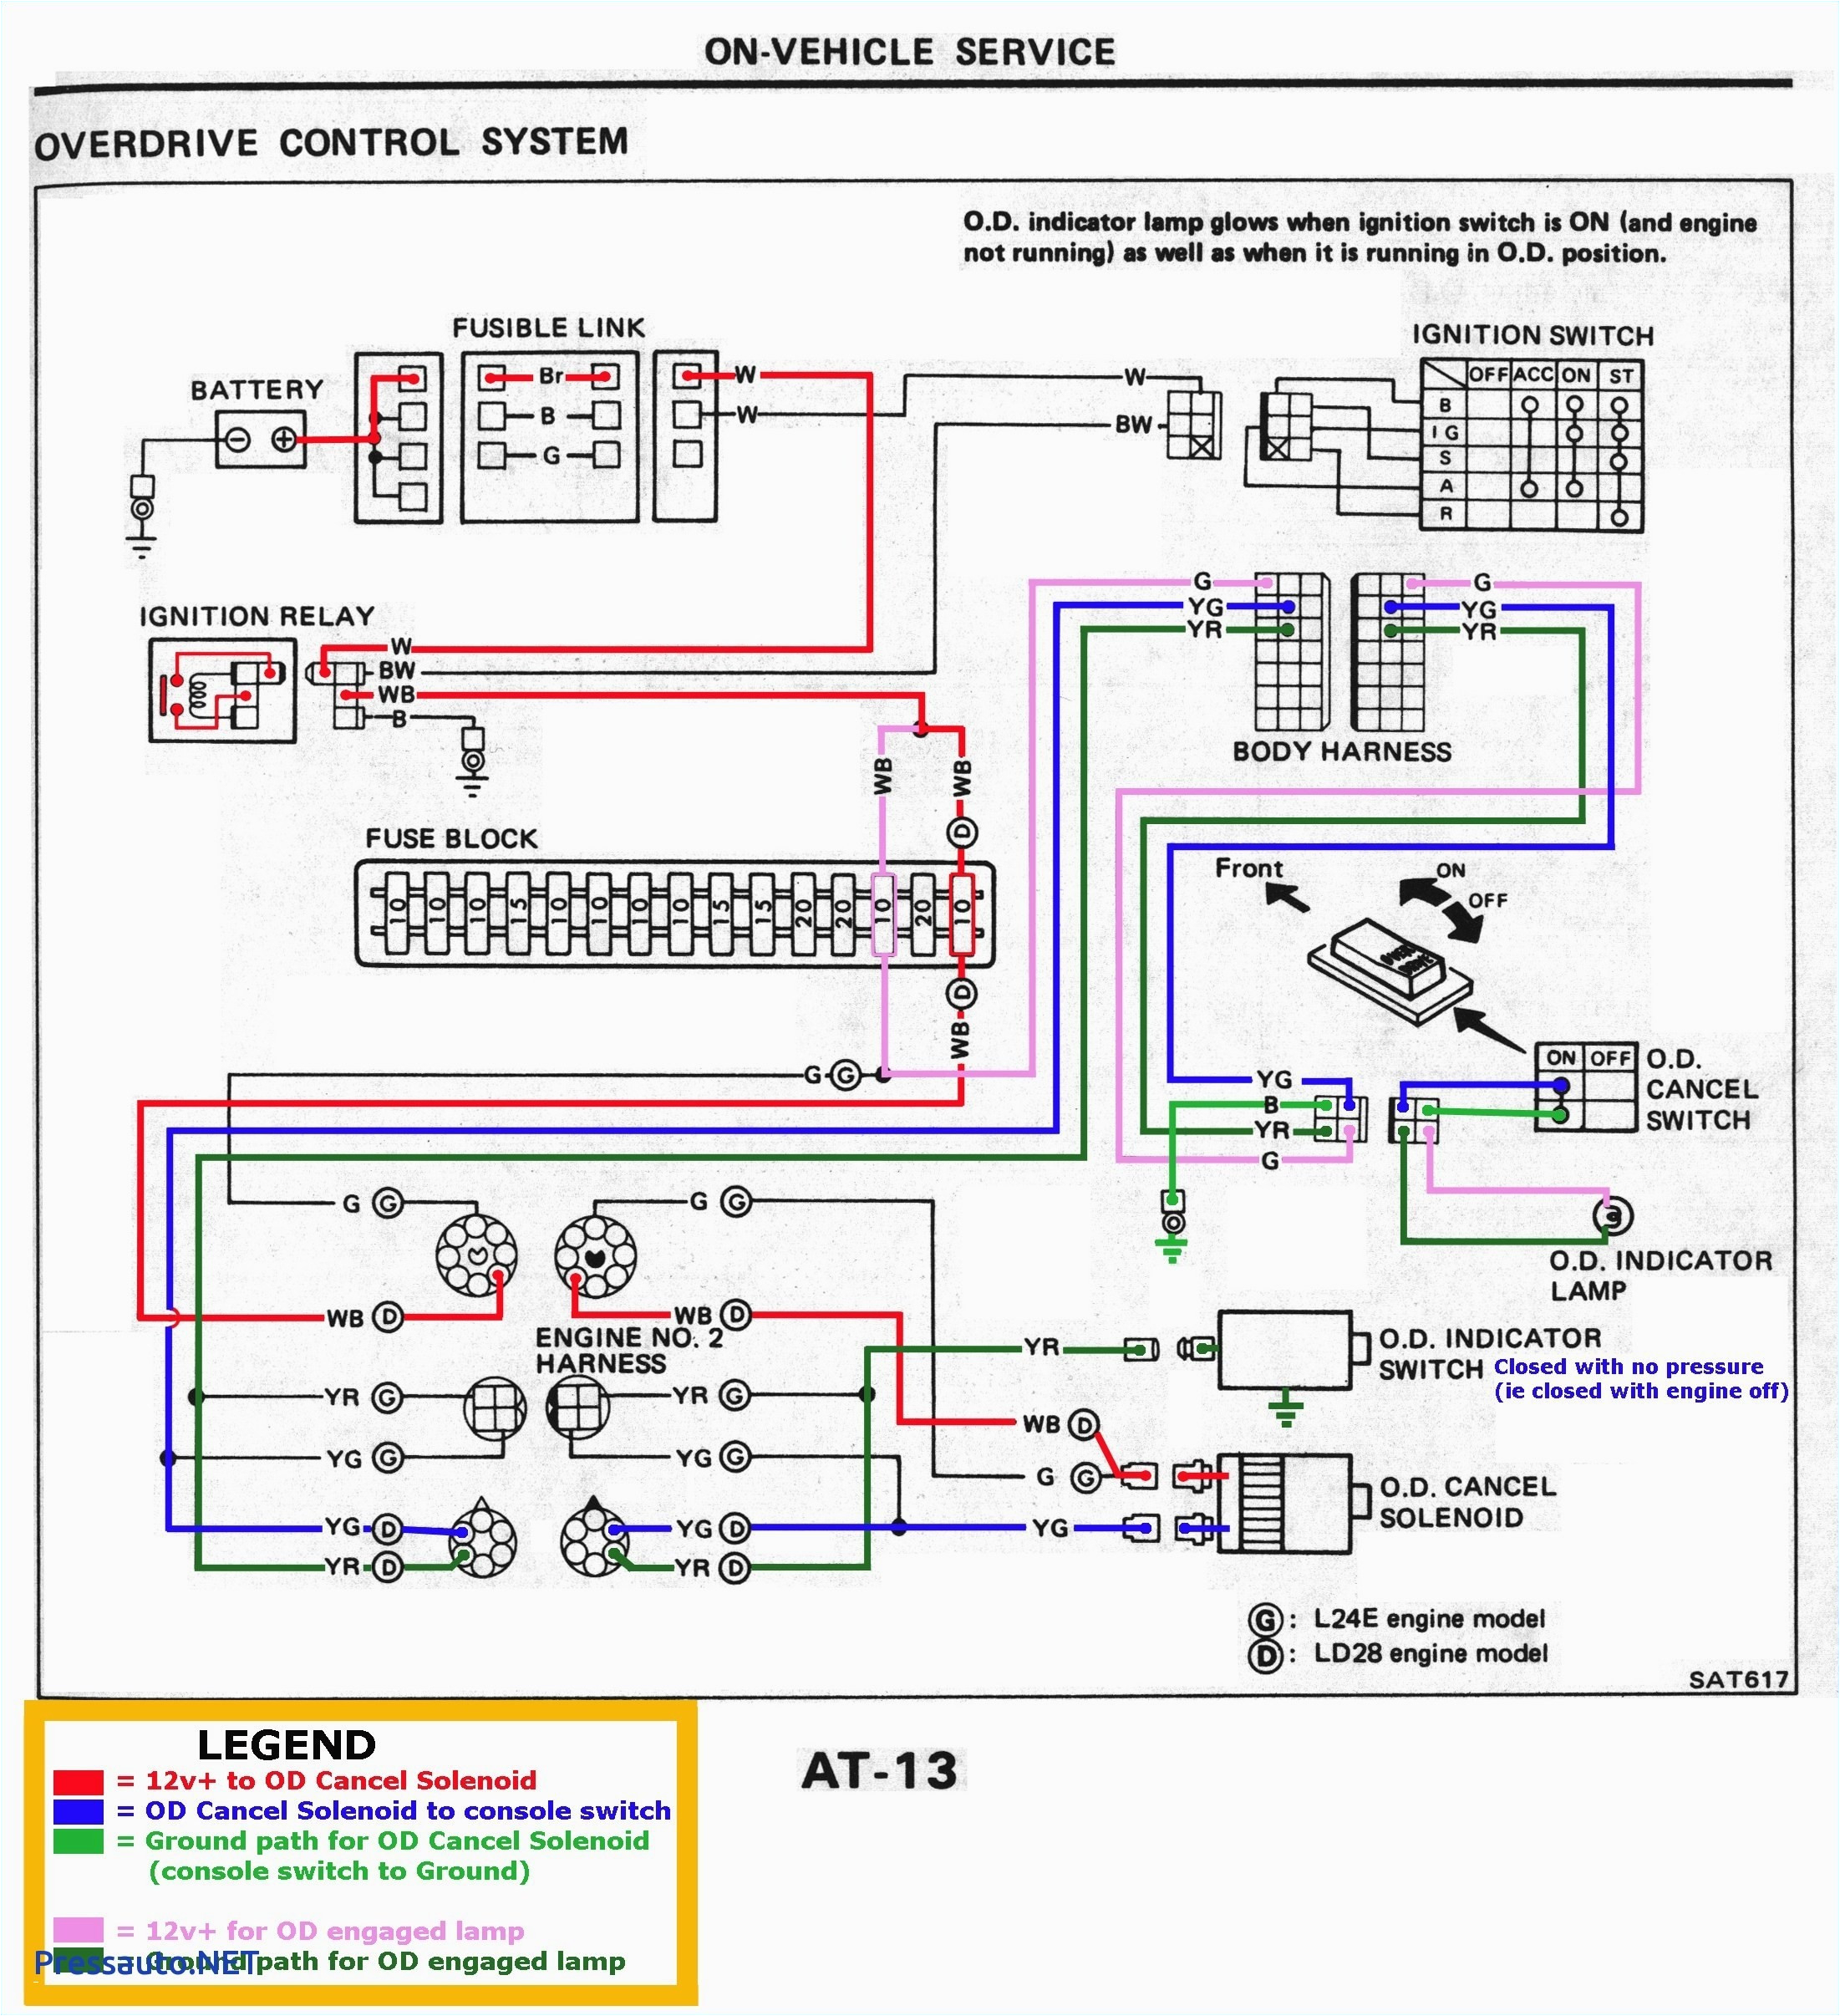 bunker hill security camera wiring diagram collection wiring diagram for home alarm save bunker hill